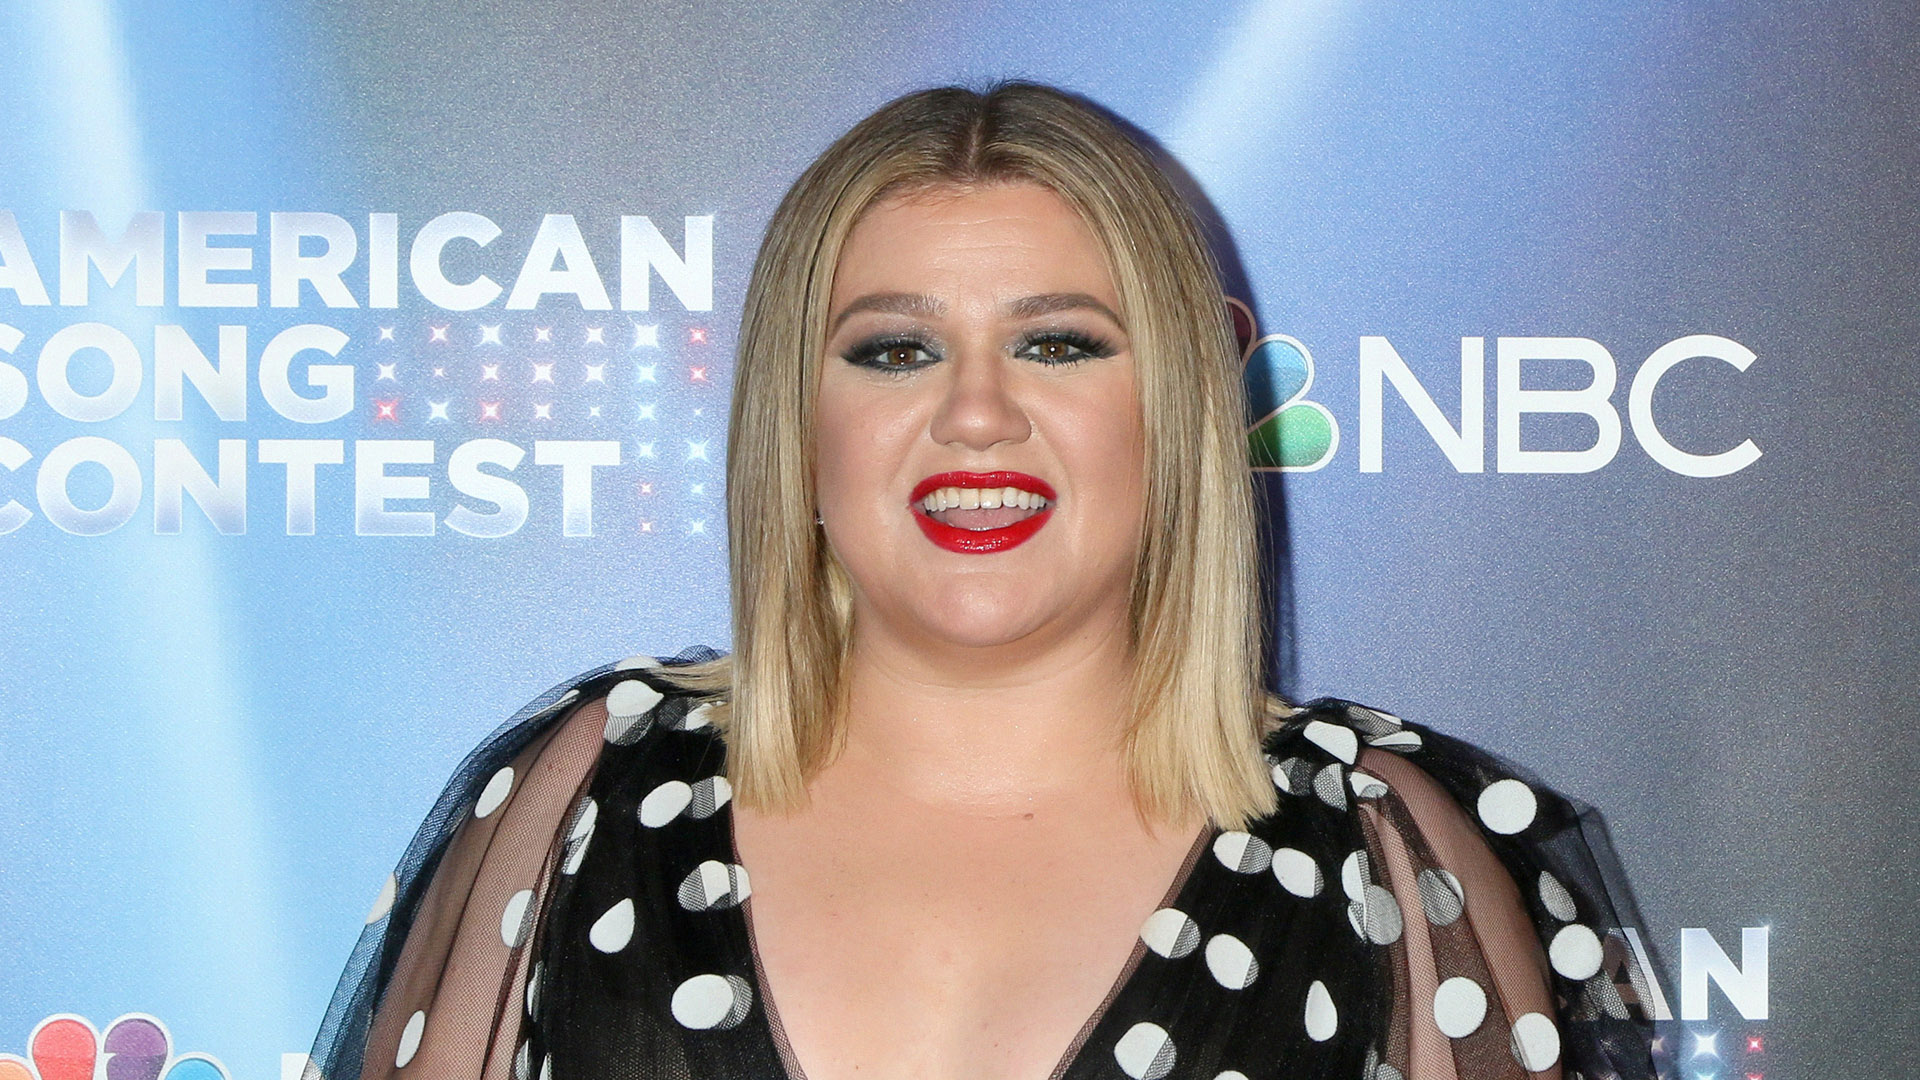 Kelly Clarkson May Have Accidentally Helped This SNL Star Get the Job